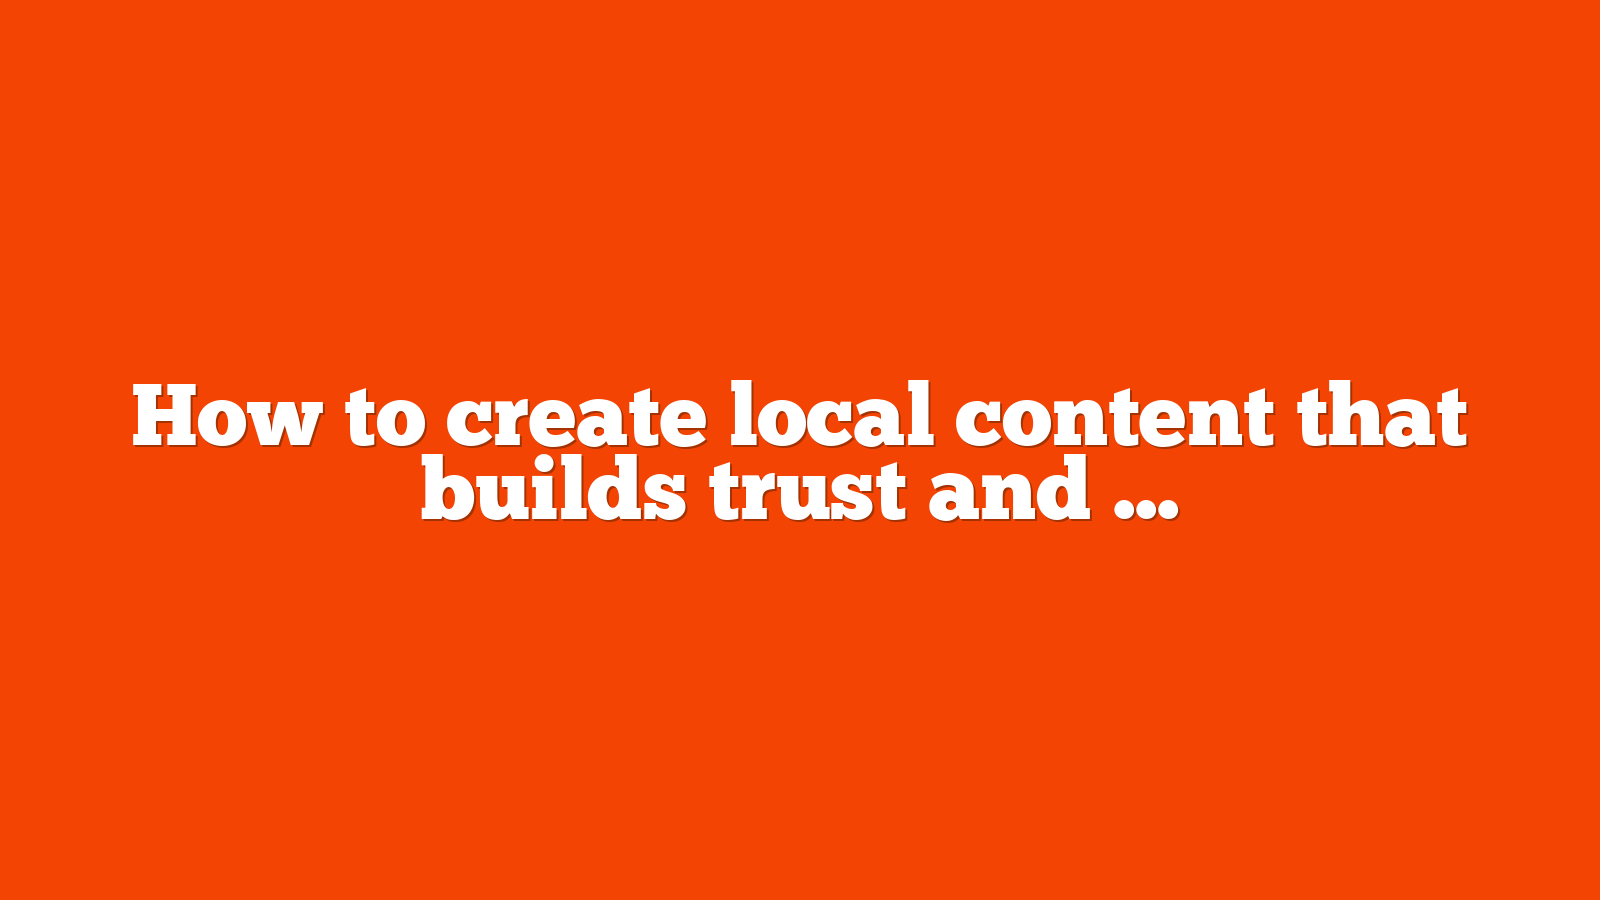 How to create local content that builds trust and drives sales